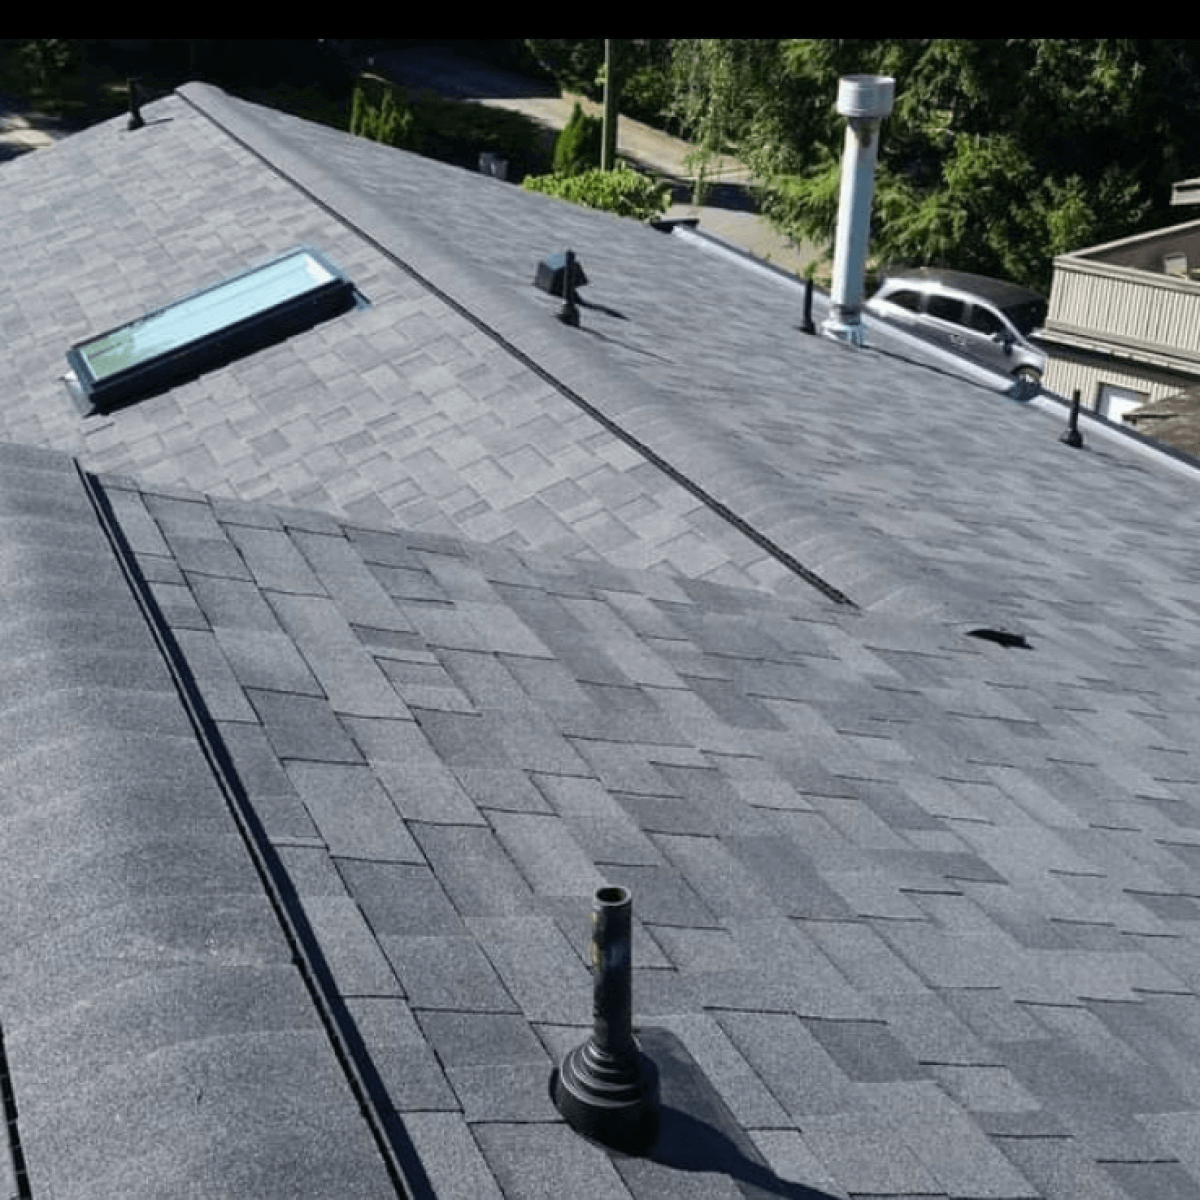 An aerial view of a roof with shingles, showcasing the craftsmanship of the best roofers in Vancouver.